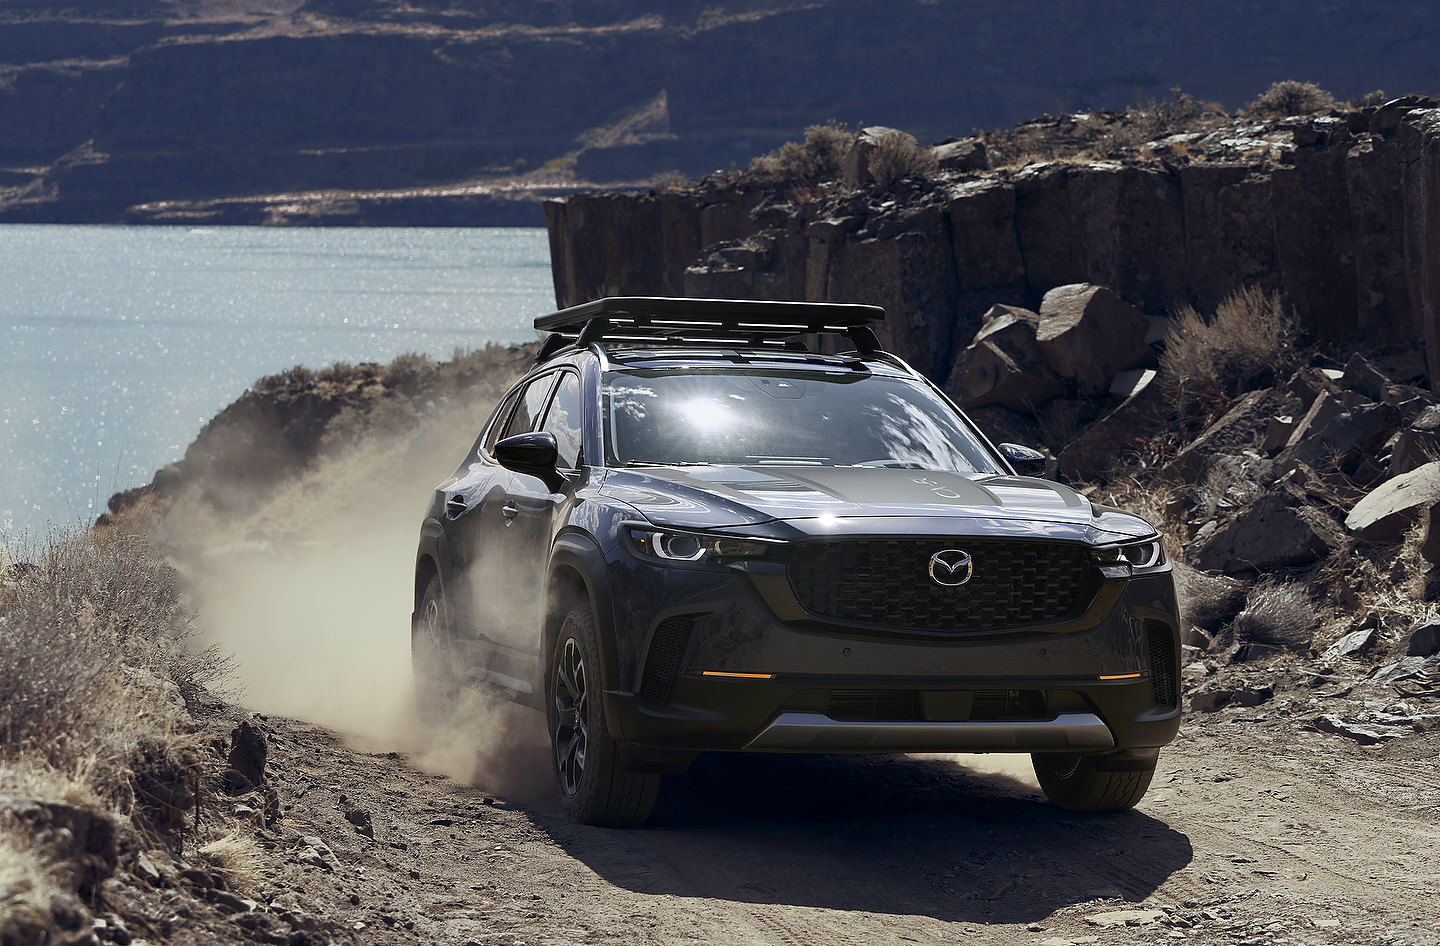 The 2023 Mazda CX-50 is a Rugged and Luxurious SUV